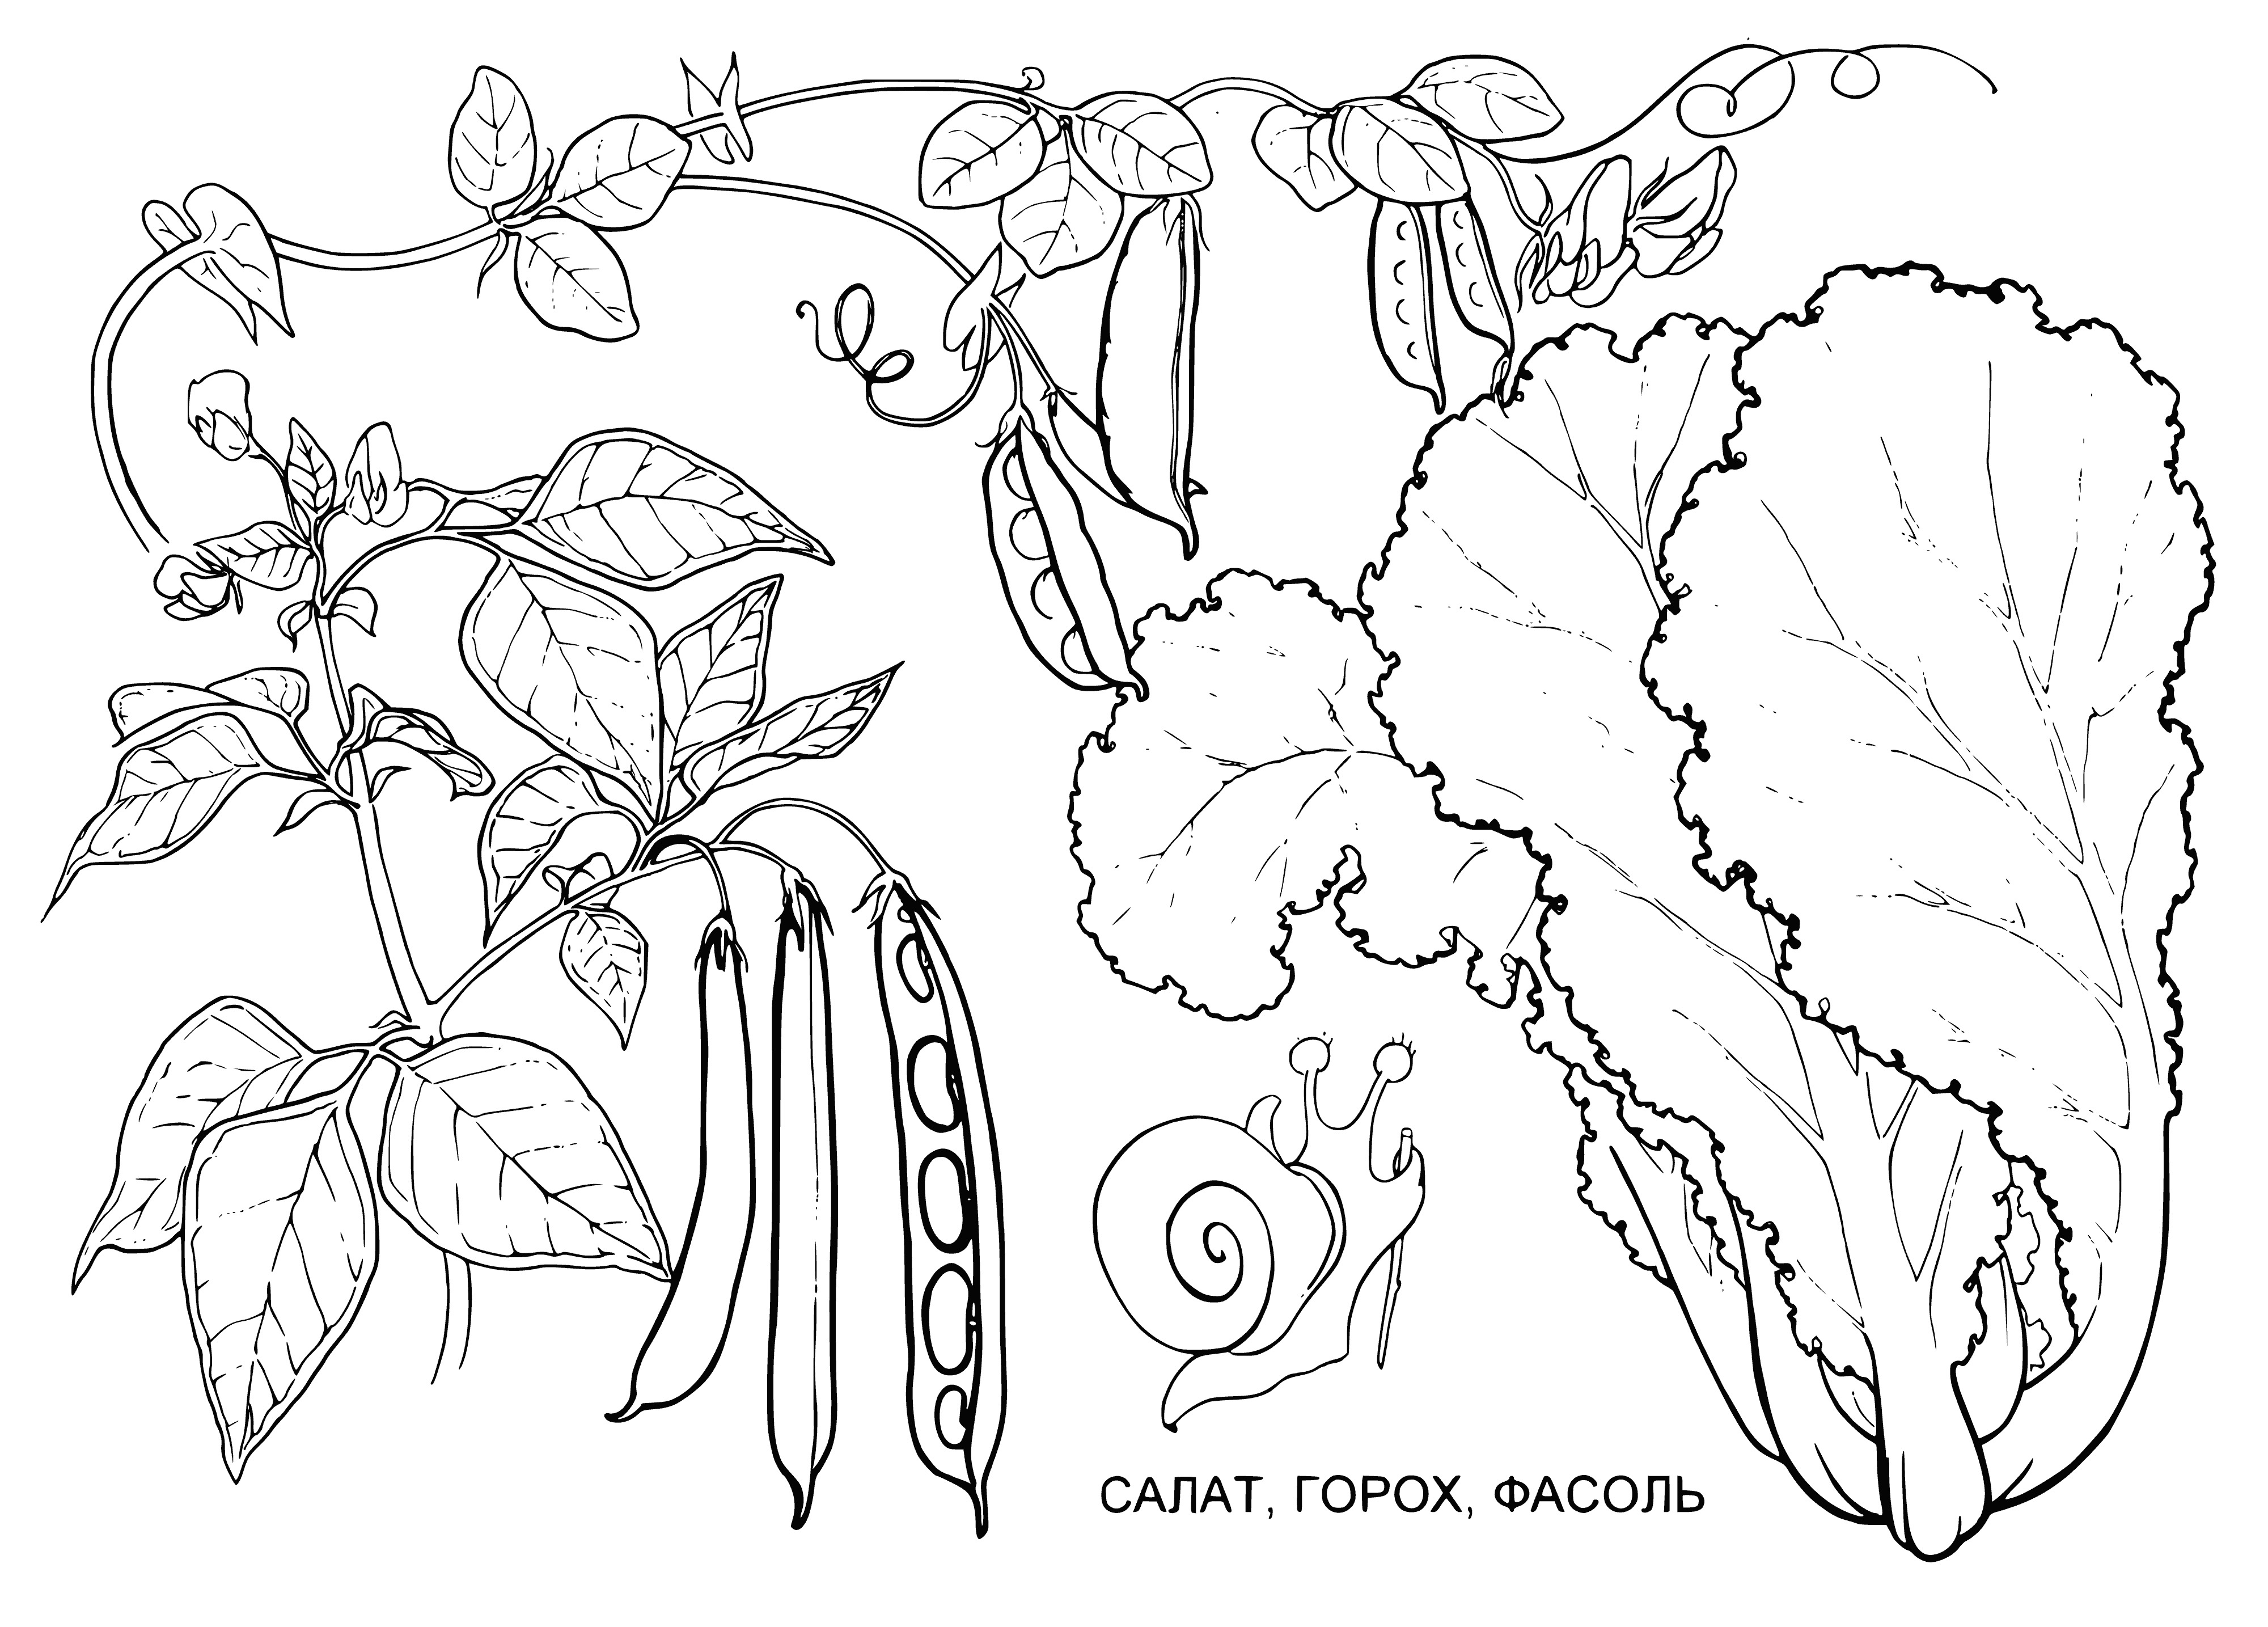 Salad, peas and beans coloring page